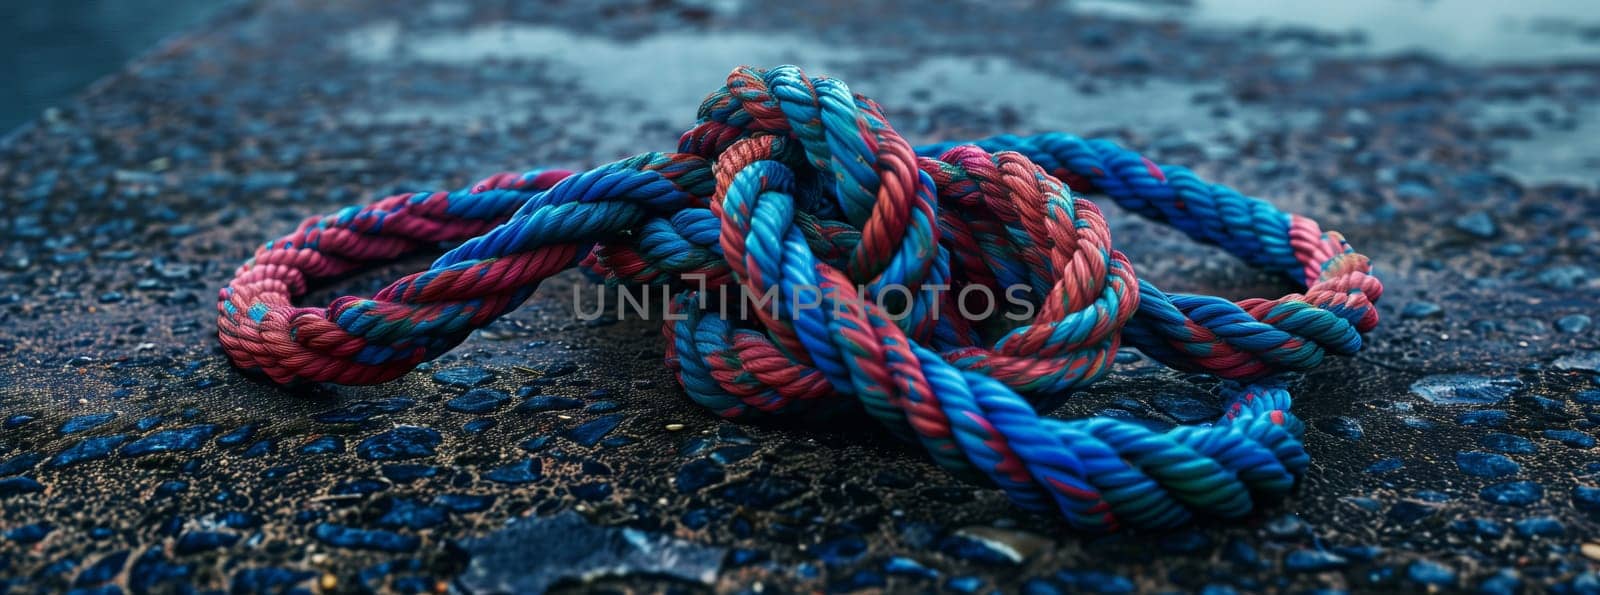 An electric blue and magenta rope is artistically laid out on the grass, creating a striking pattern against the soil. This craft resembles automotive tire track marks at an outdoor event